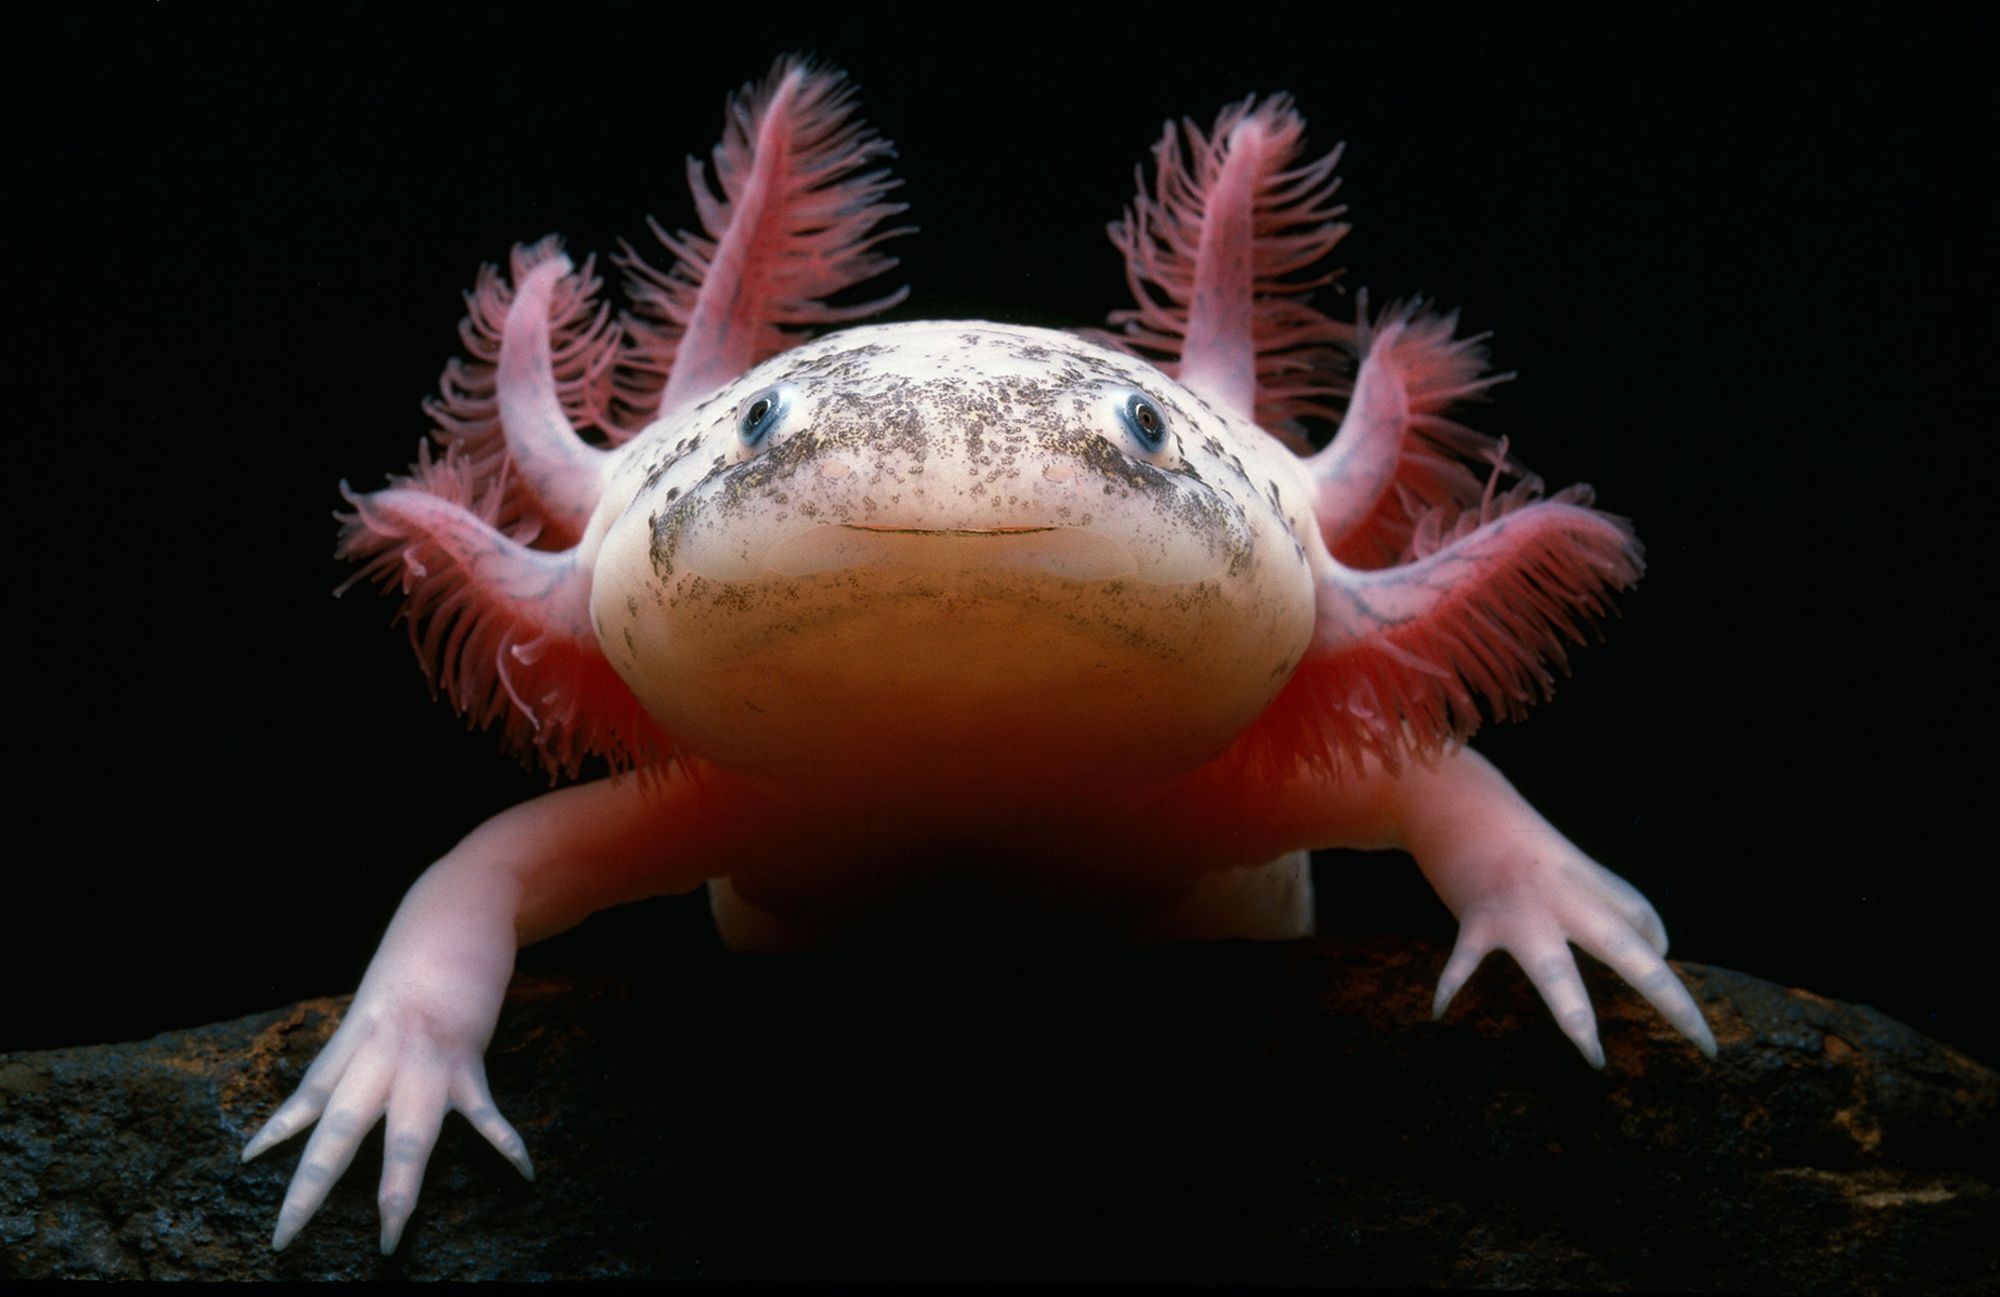 With their frilled external gills, axolotls maintain a youthful appearance their entire lives. Their cute, Muppet-like look has turned these aquatic salamanders into pop culture sensations.